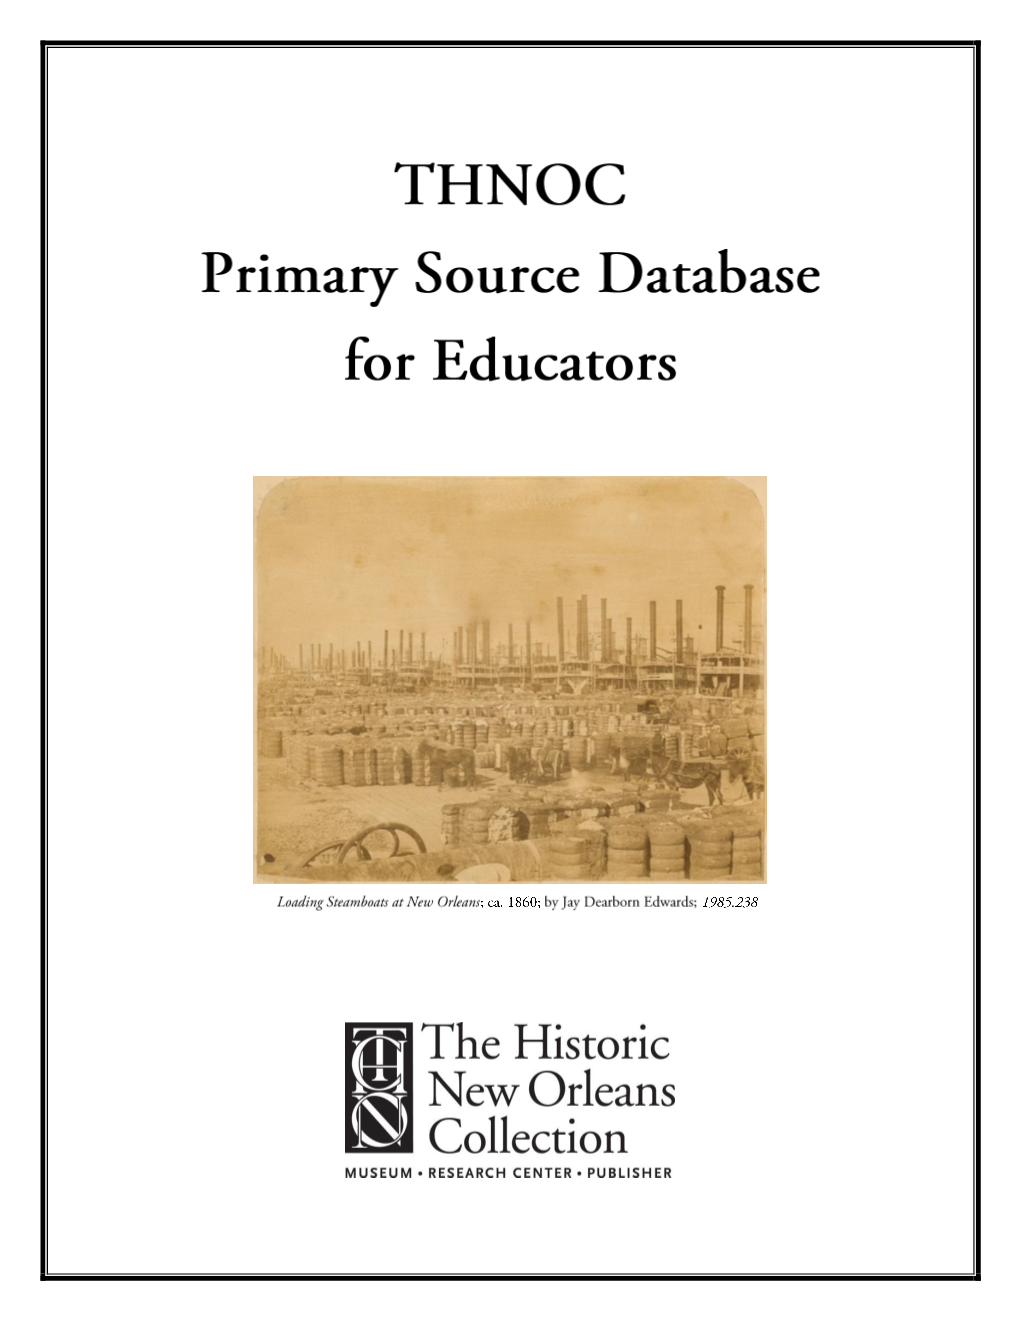 Primary Source Database for Educators